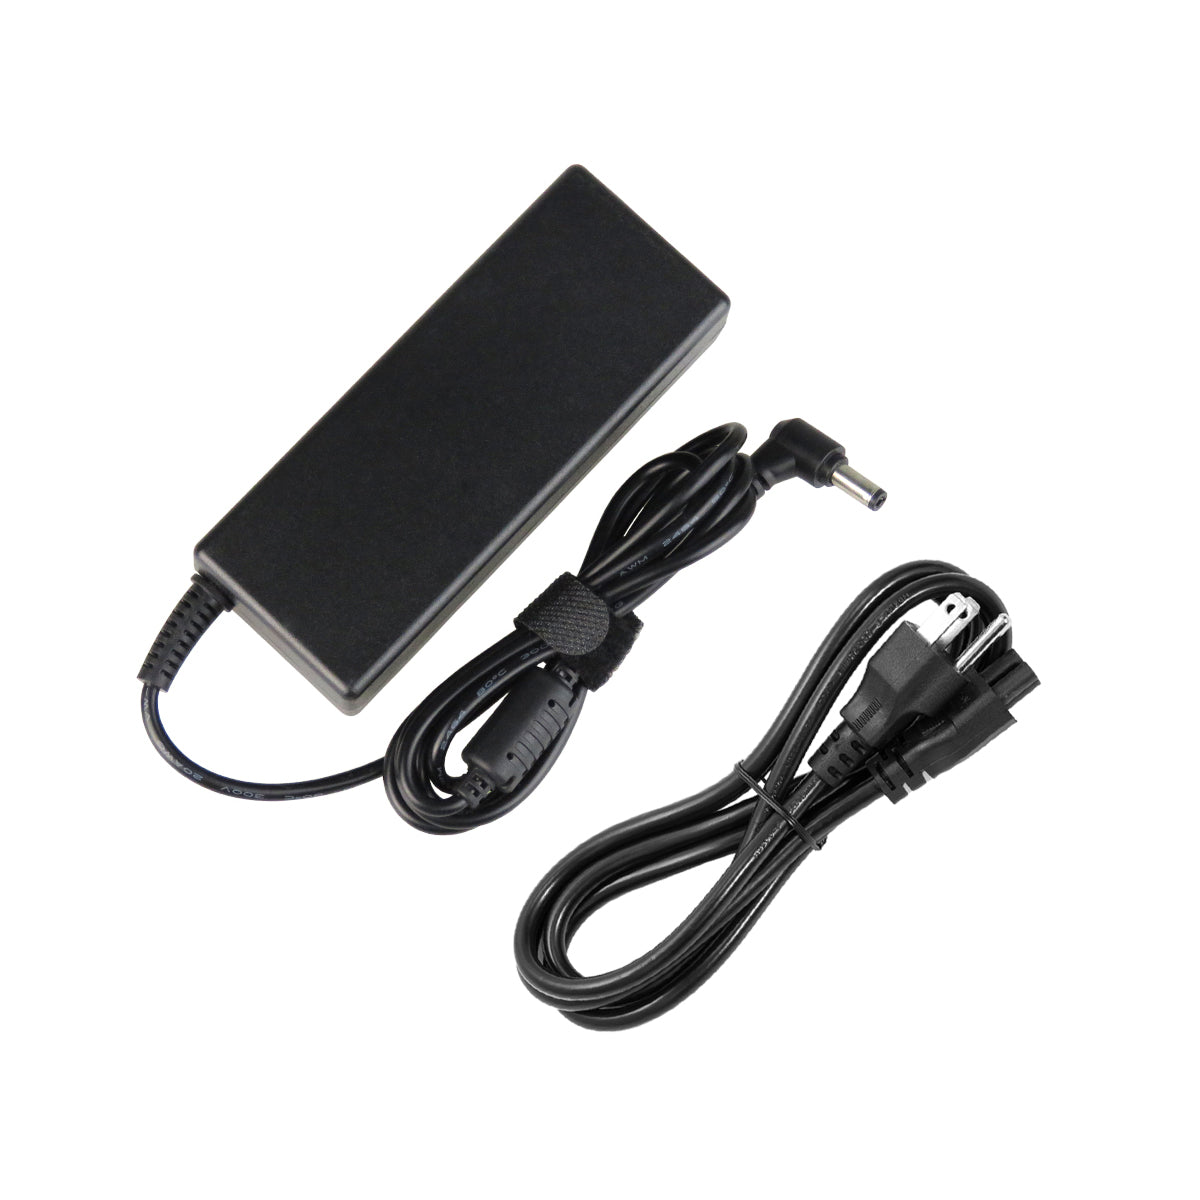 AC Adapter Charger for ASUS a55a Series Notebook.